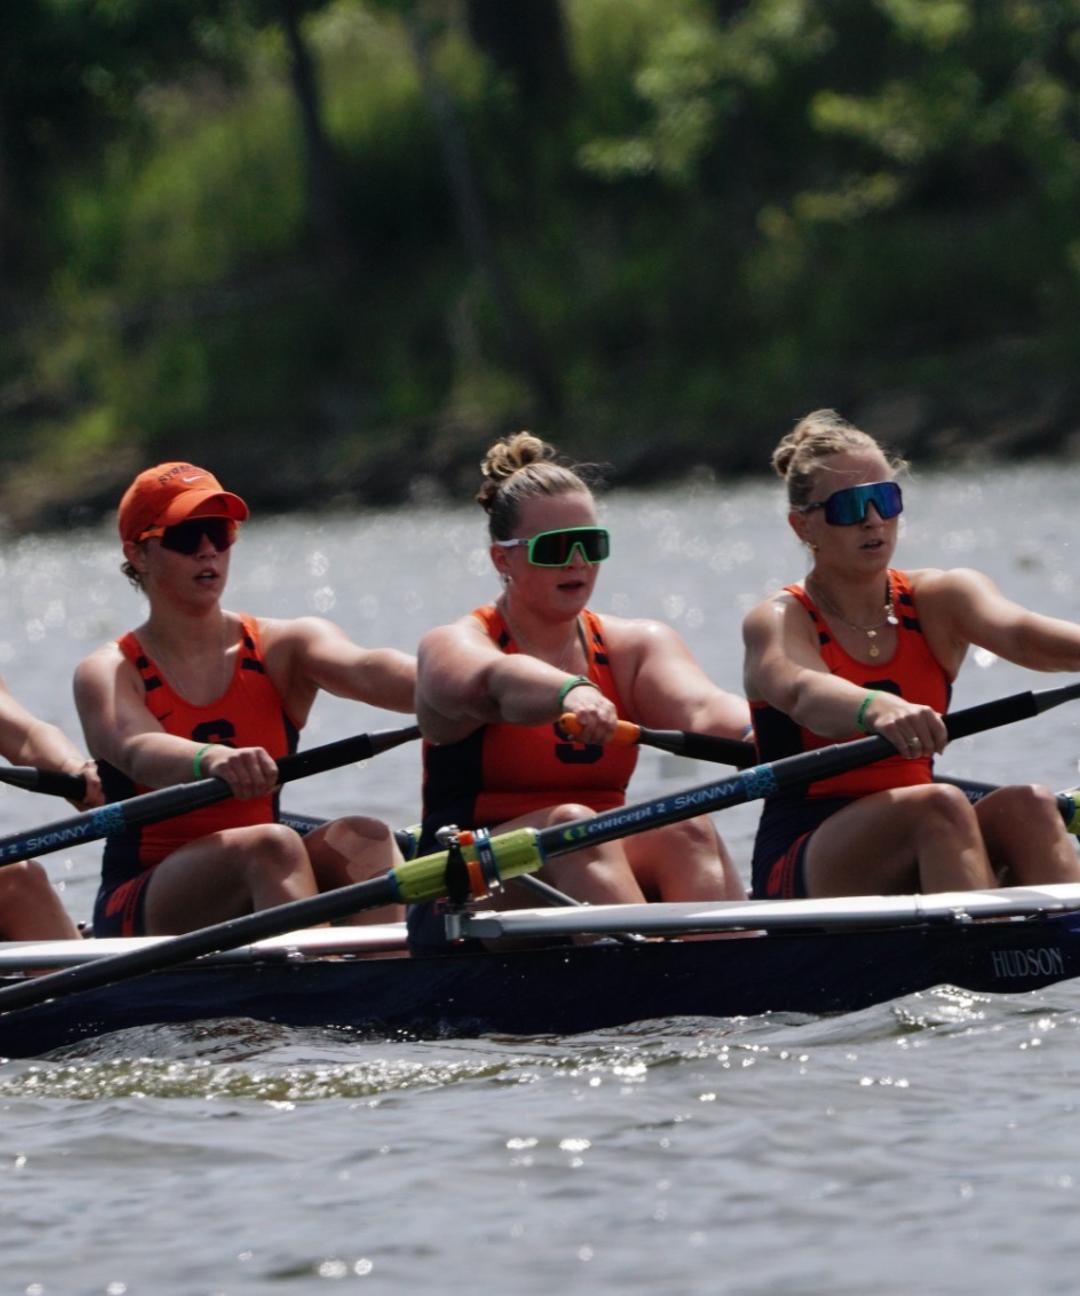 Image related to Orange Send Two Boats to A/B Semifinals at NCAA Championship